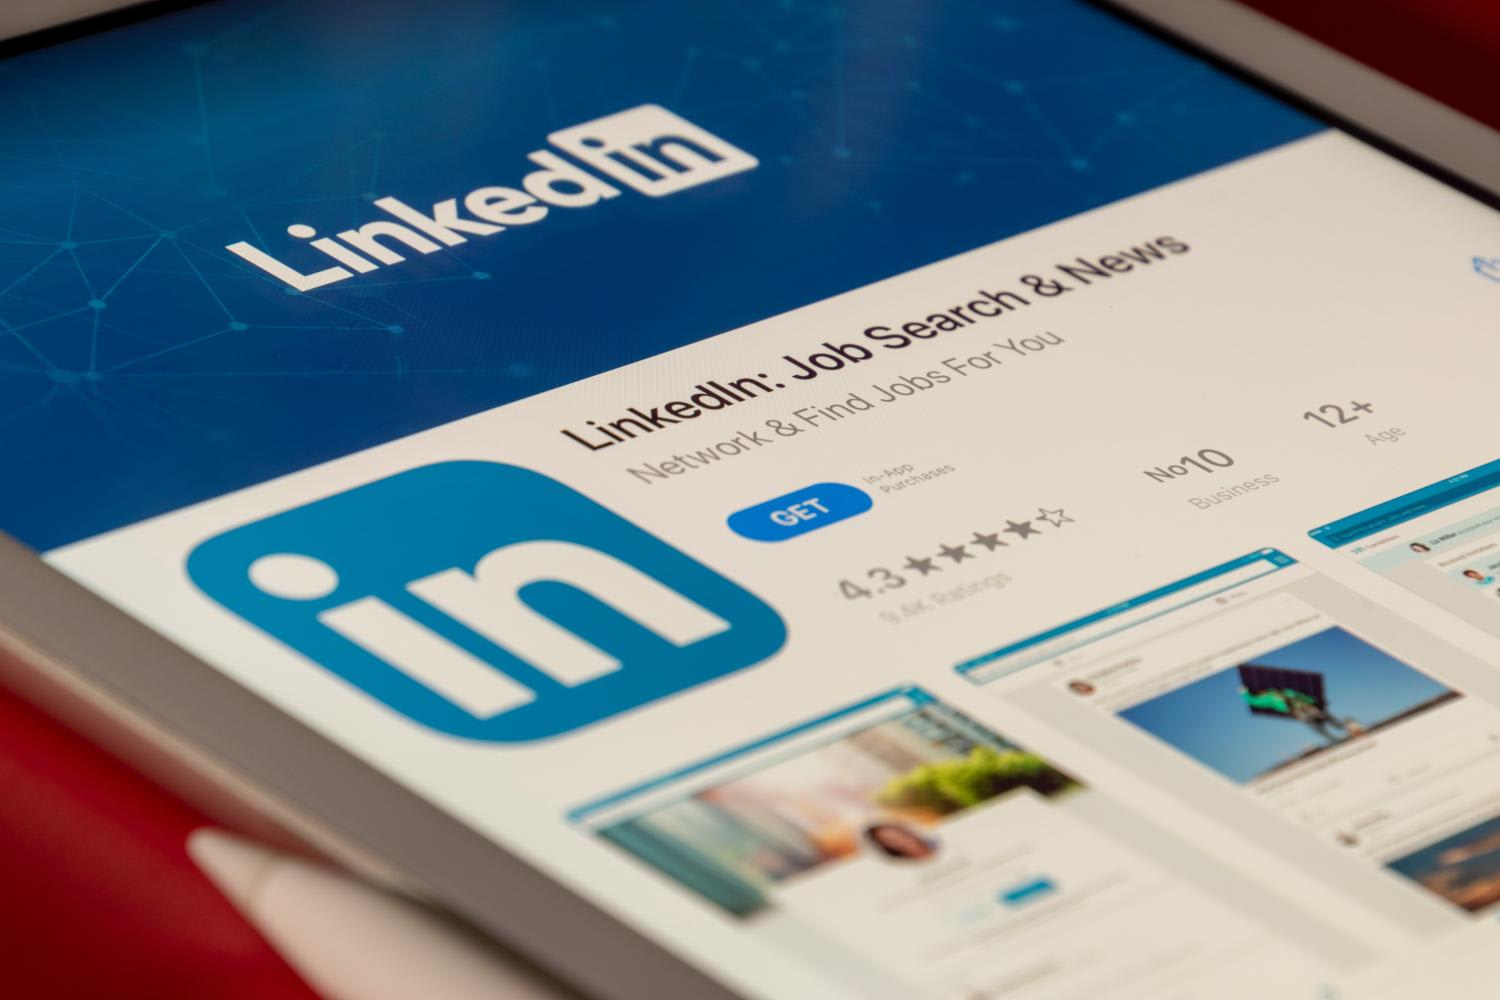 Since the start of the pandemic, as office workers missed in-person interactions with colleagues, many people turned to LinkedIn to help make up for what they had lost. 